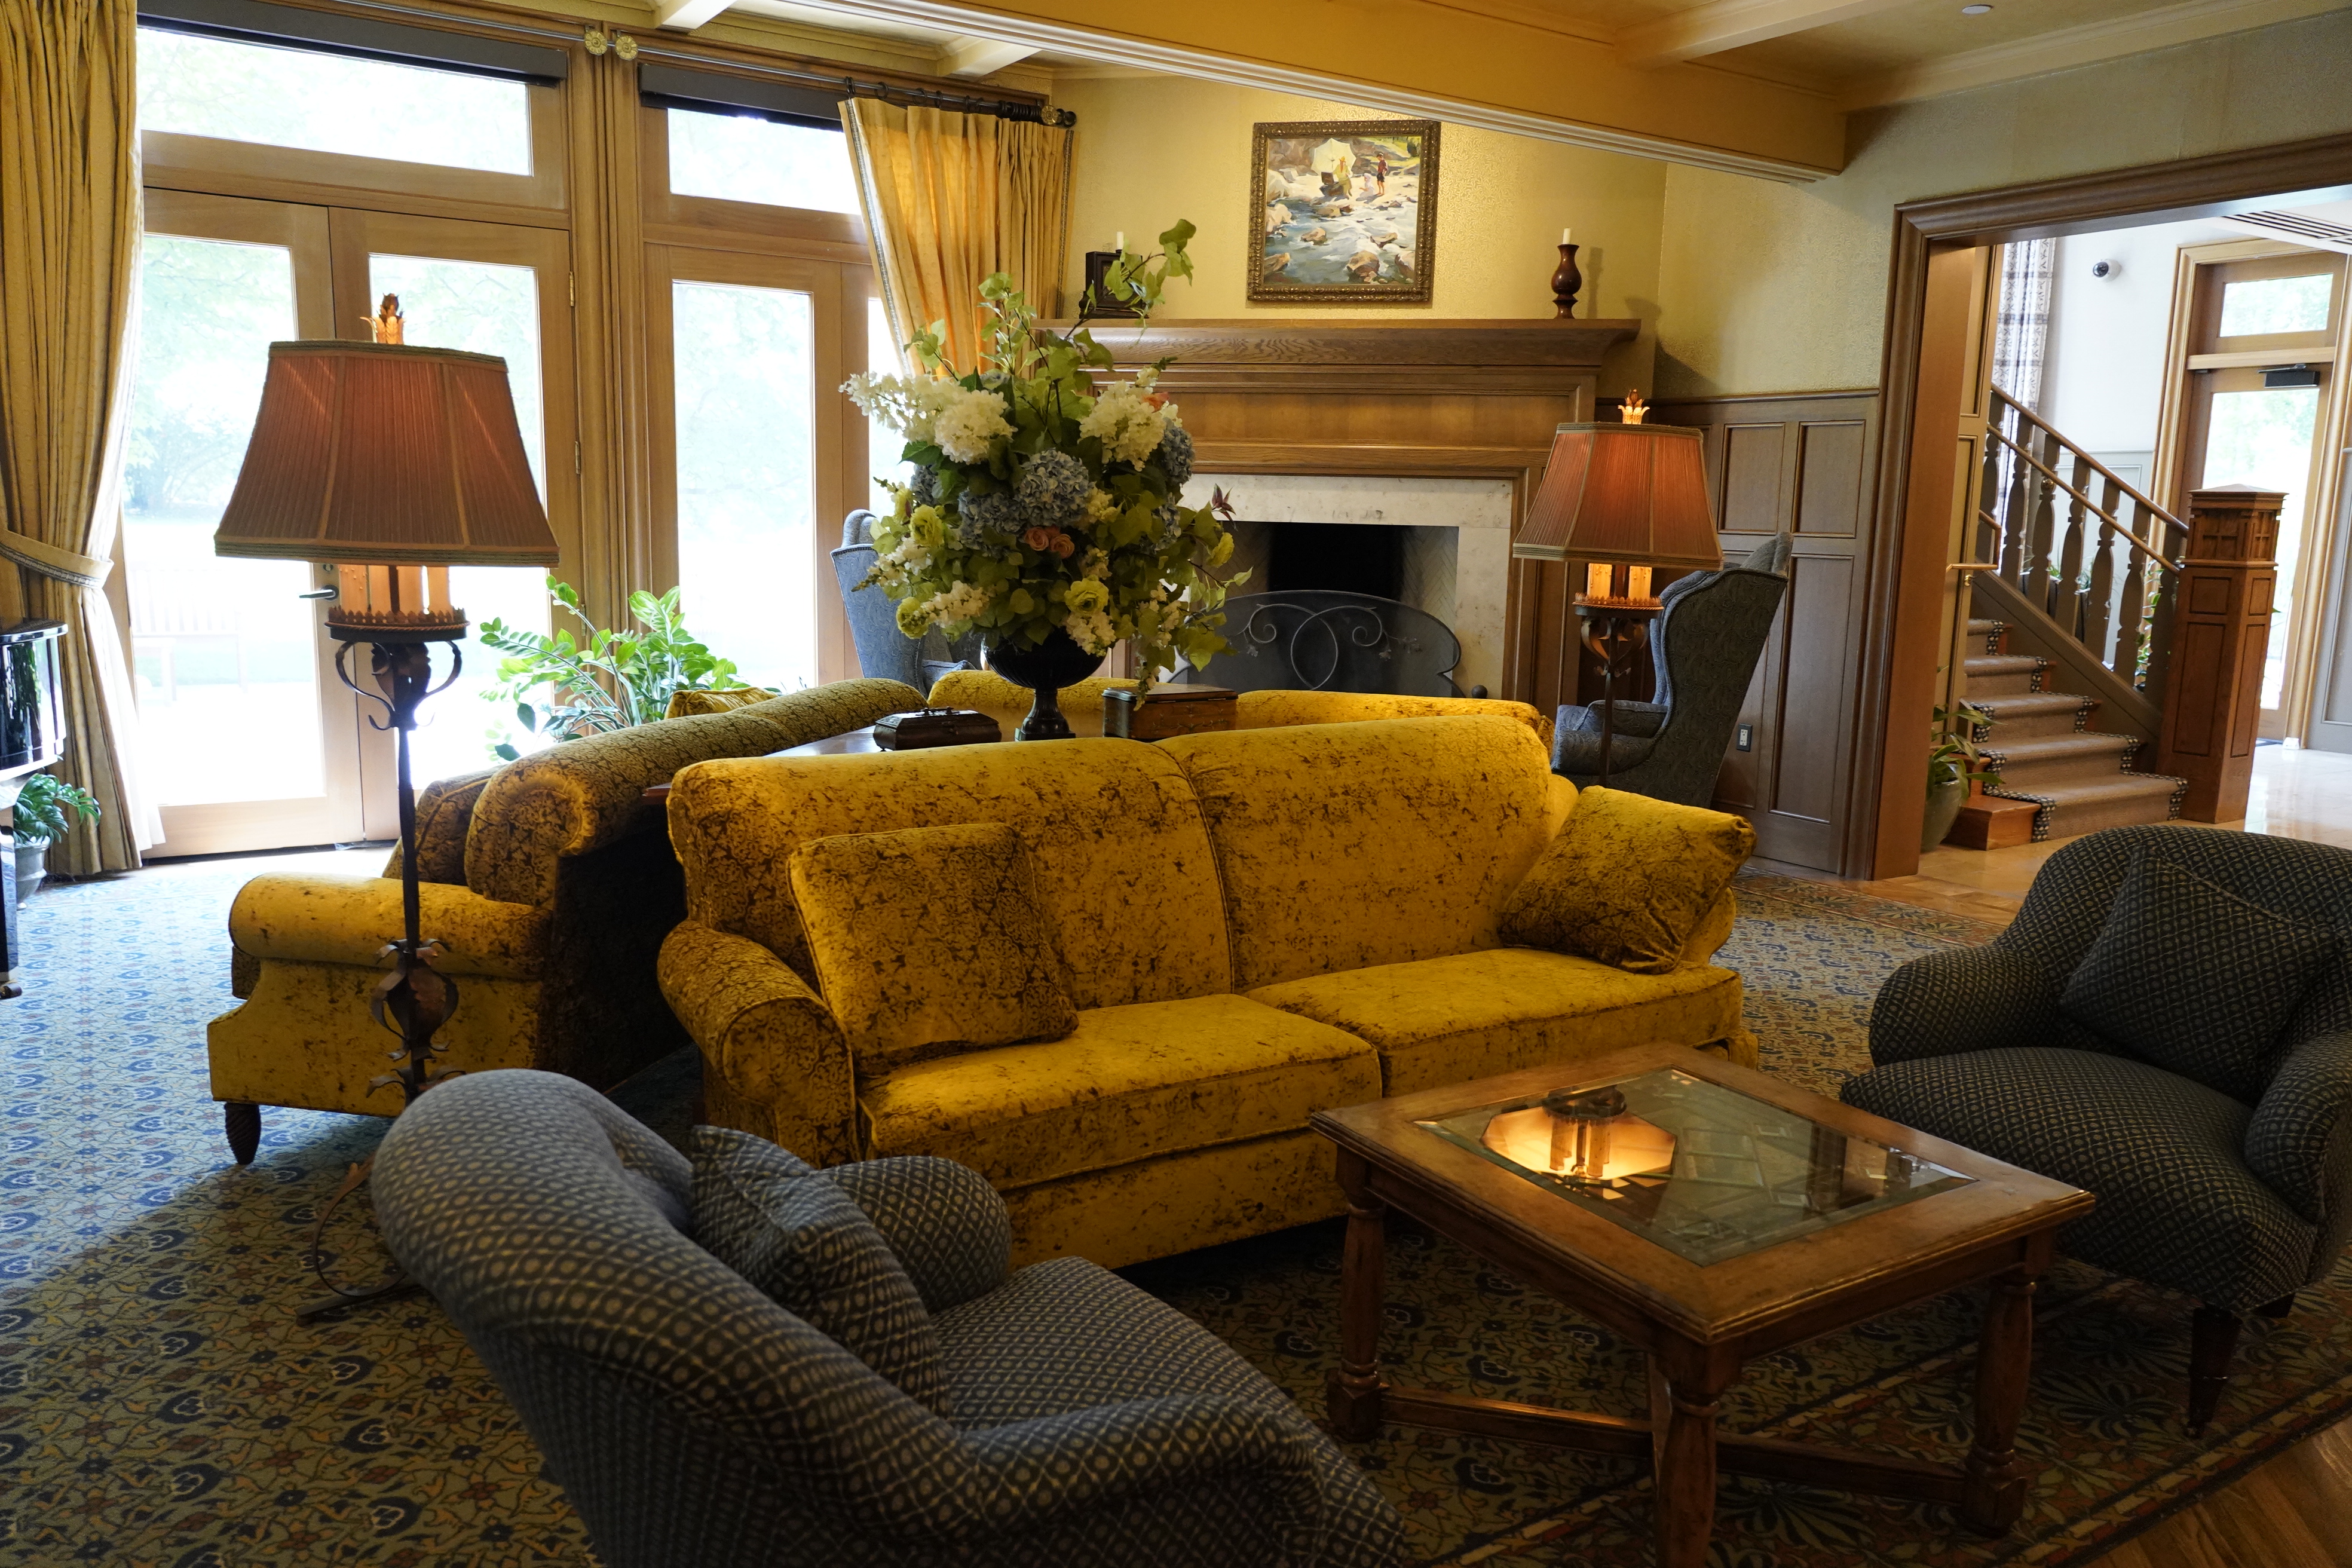 The Lodge's reupholstered furniture in the family room